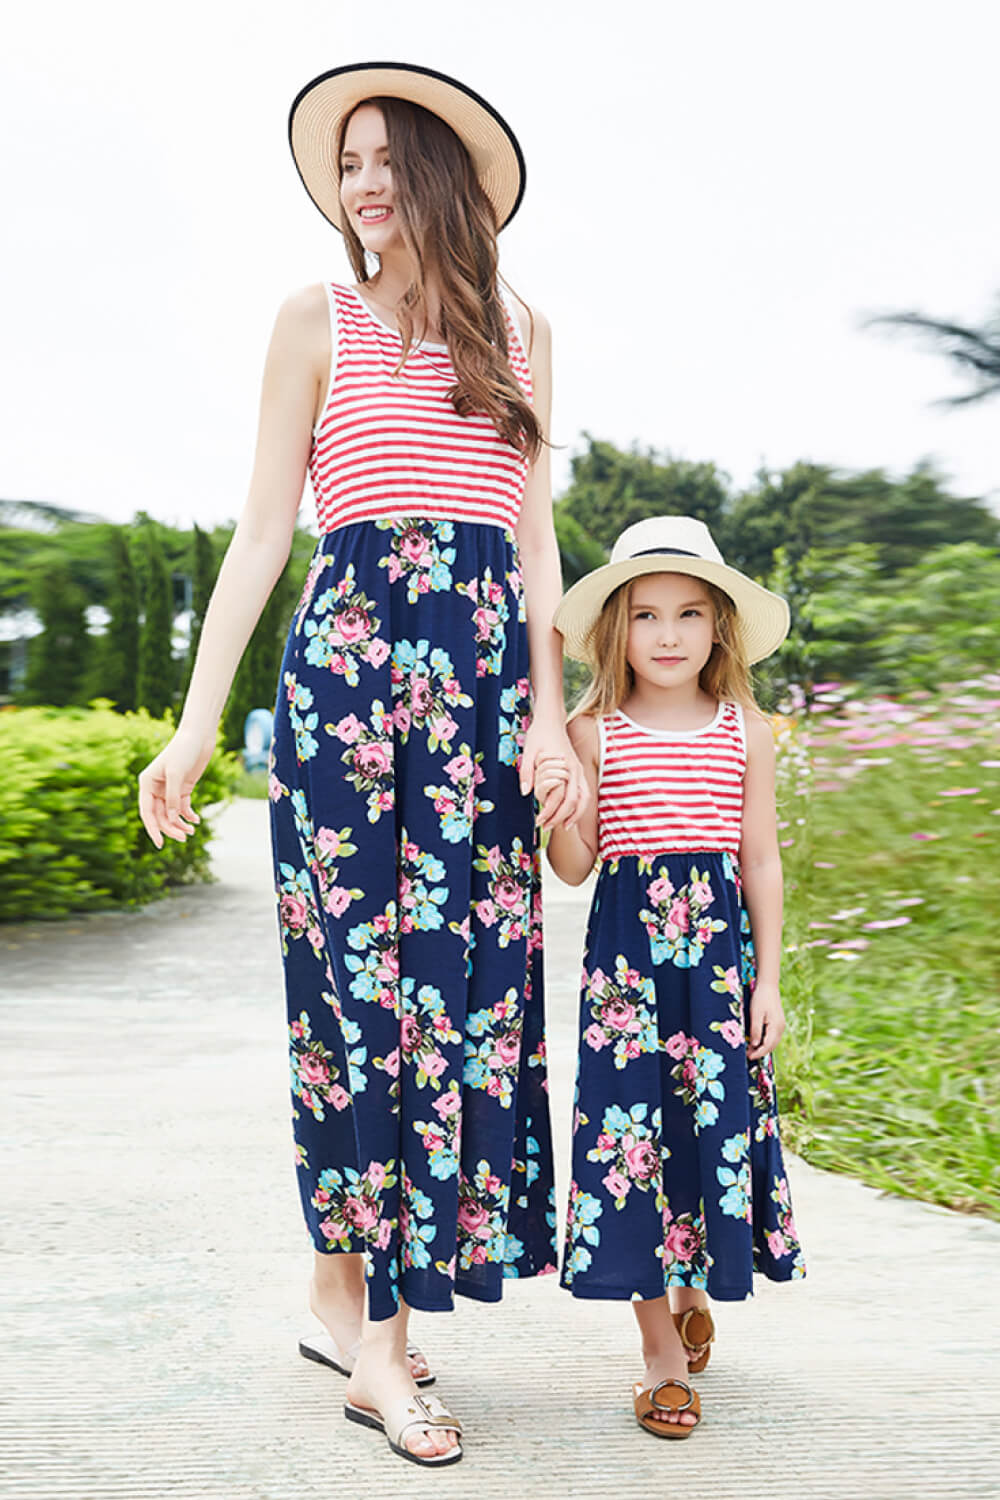 Women Striped Floral Sleeveless Dress - Mommy & Me - women's dress at TFC&H Co.